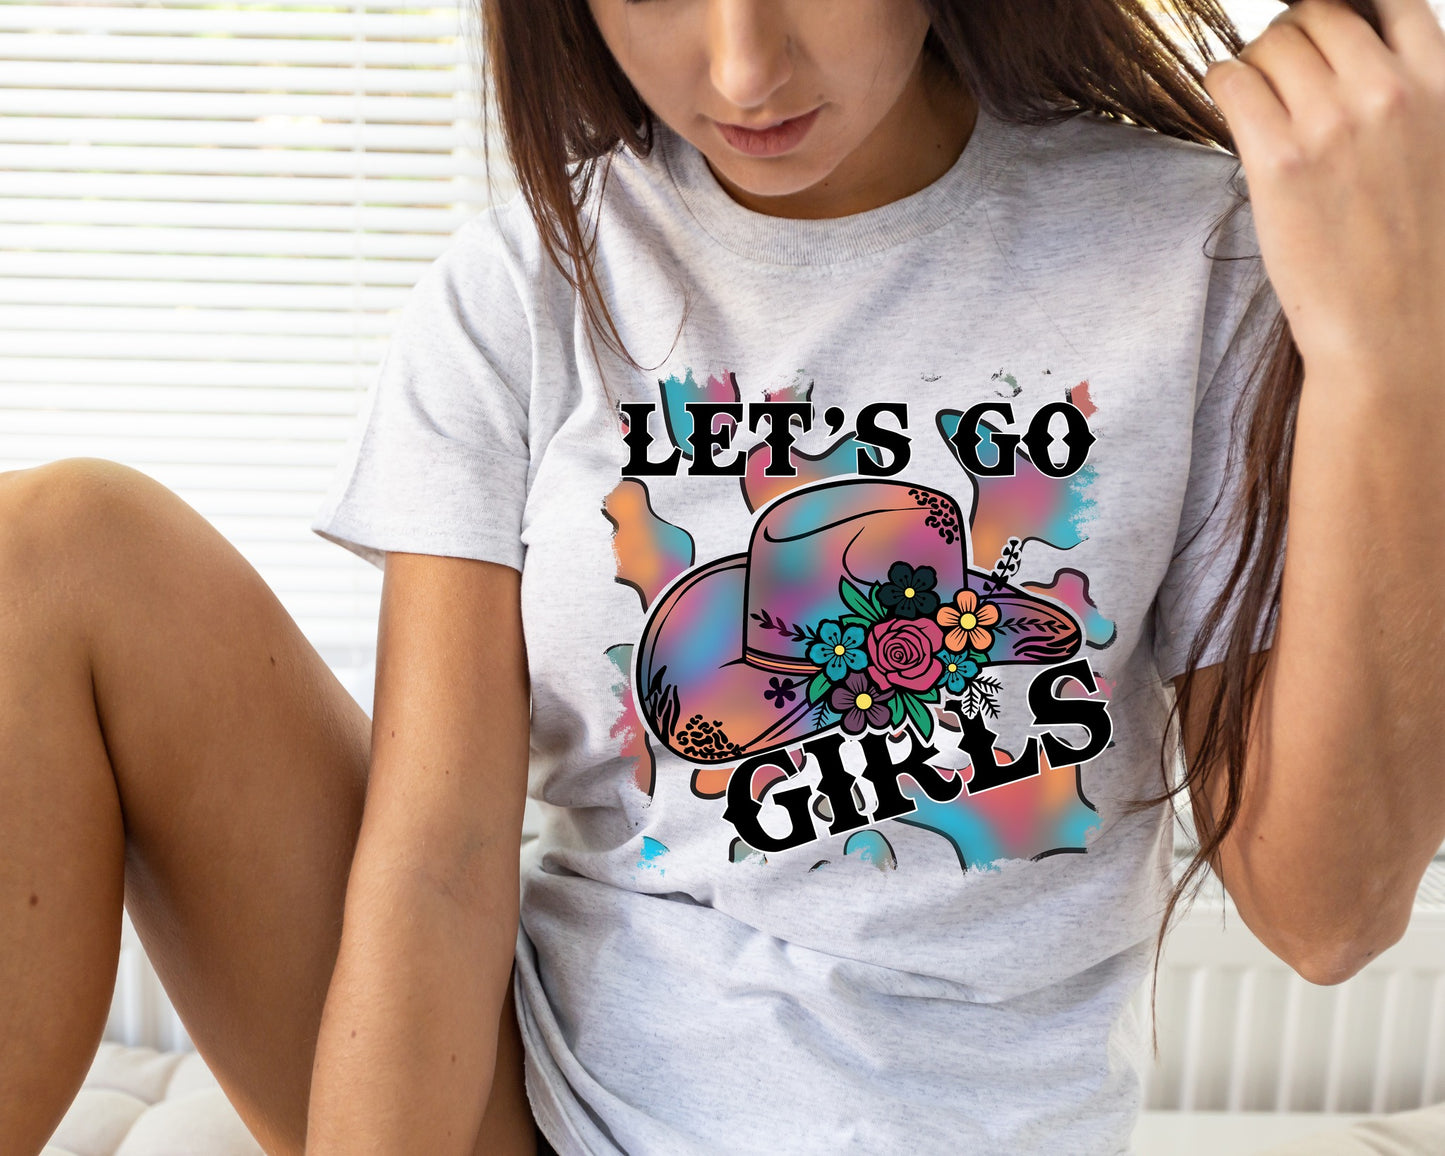 LETS GO GIRLS Tee